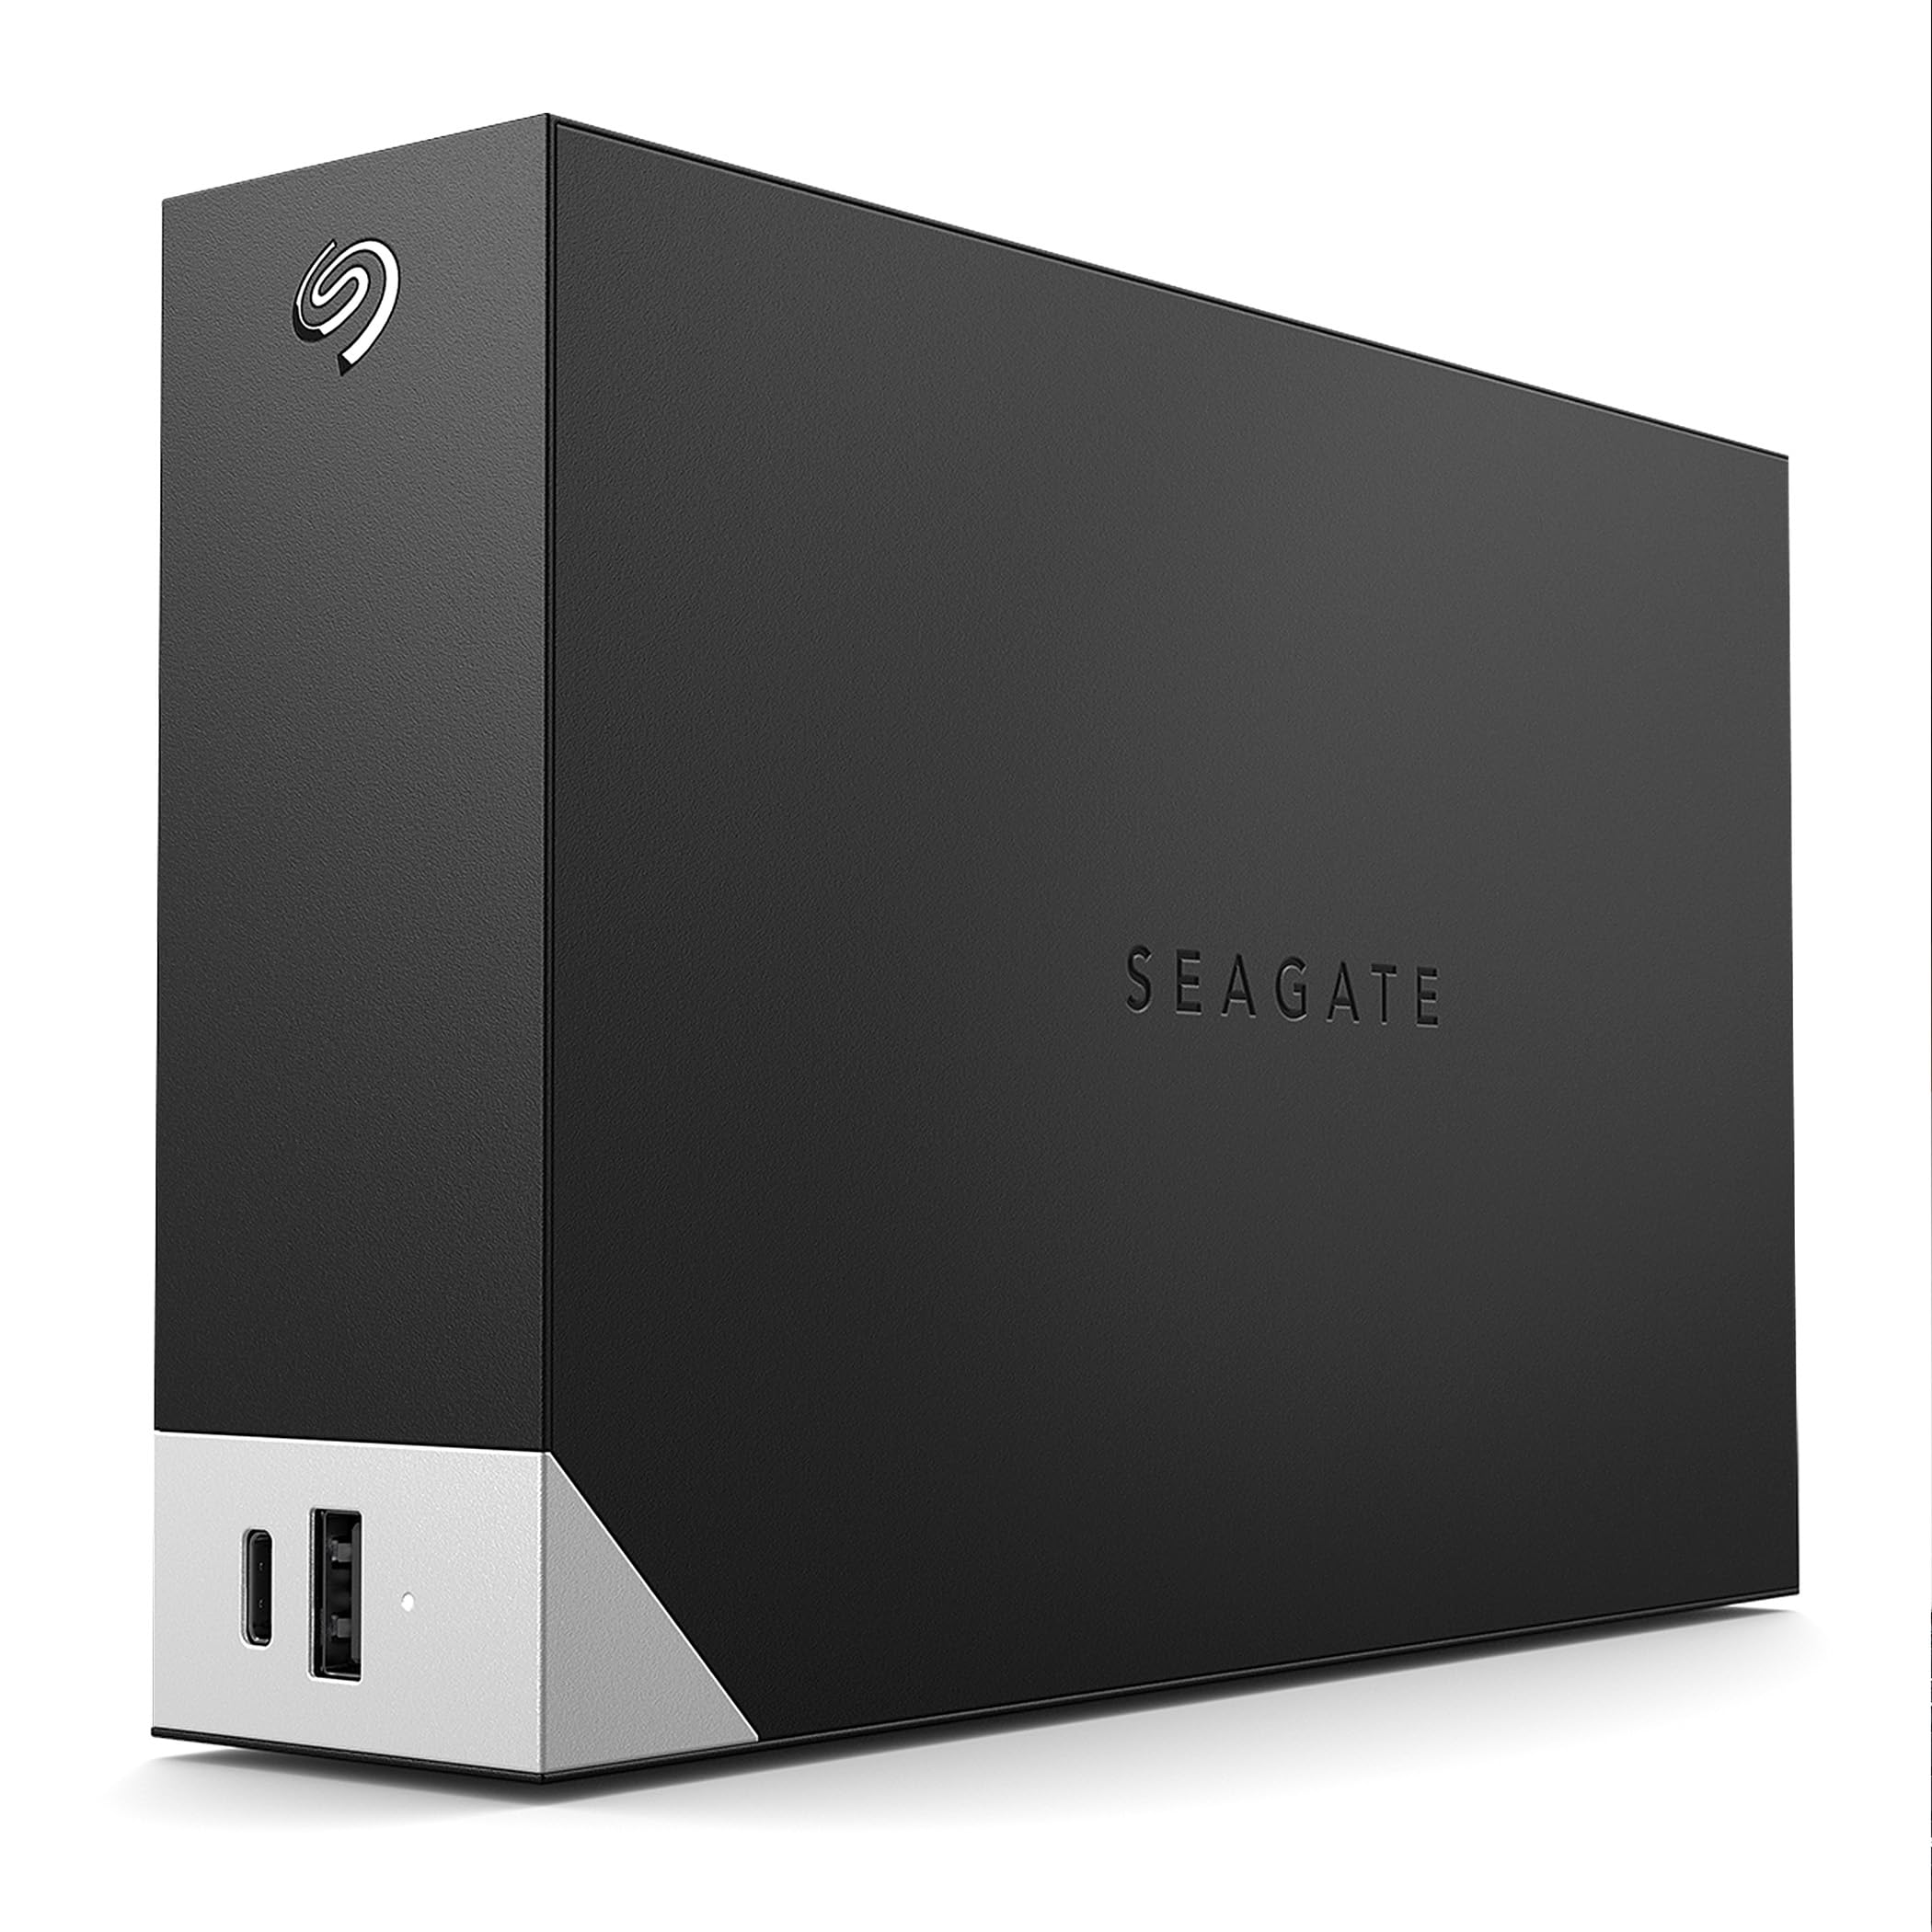 Seagate One Touch Hub 8Tb $130+tax shipped free @ Seagate Store